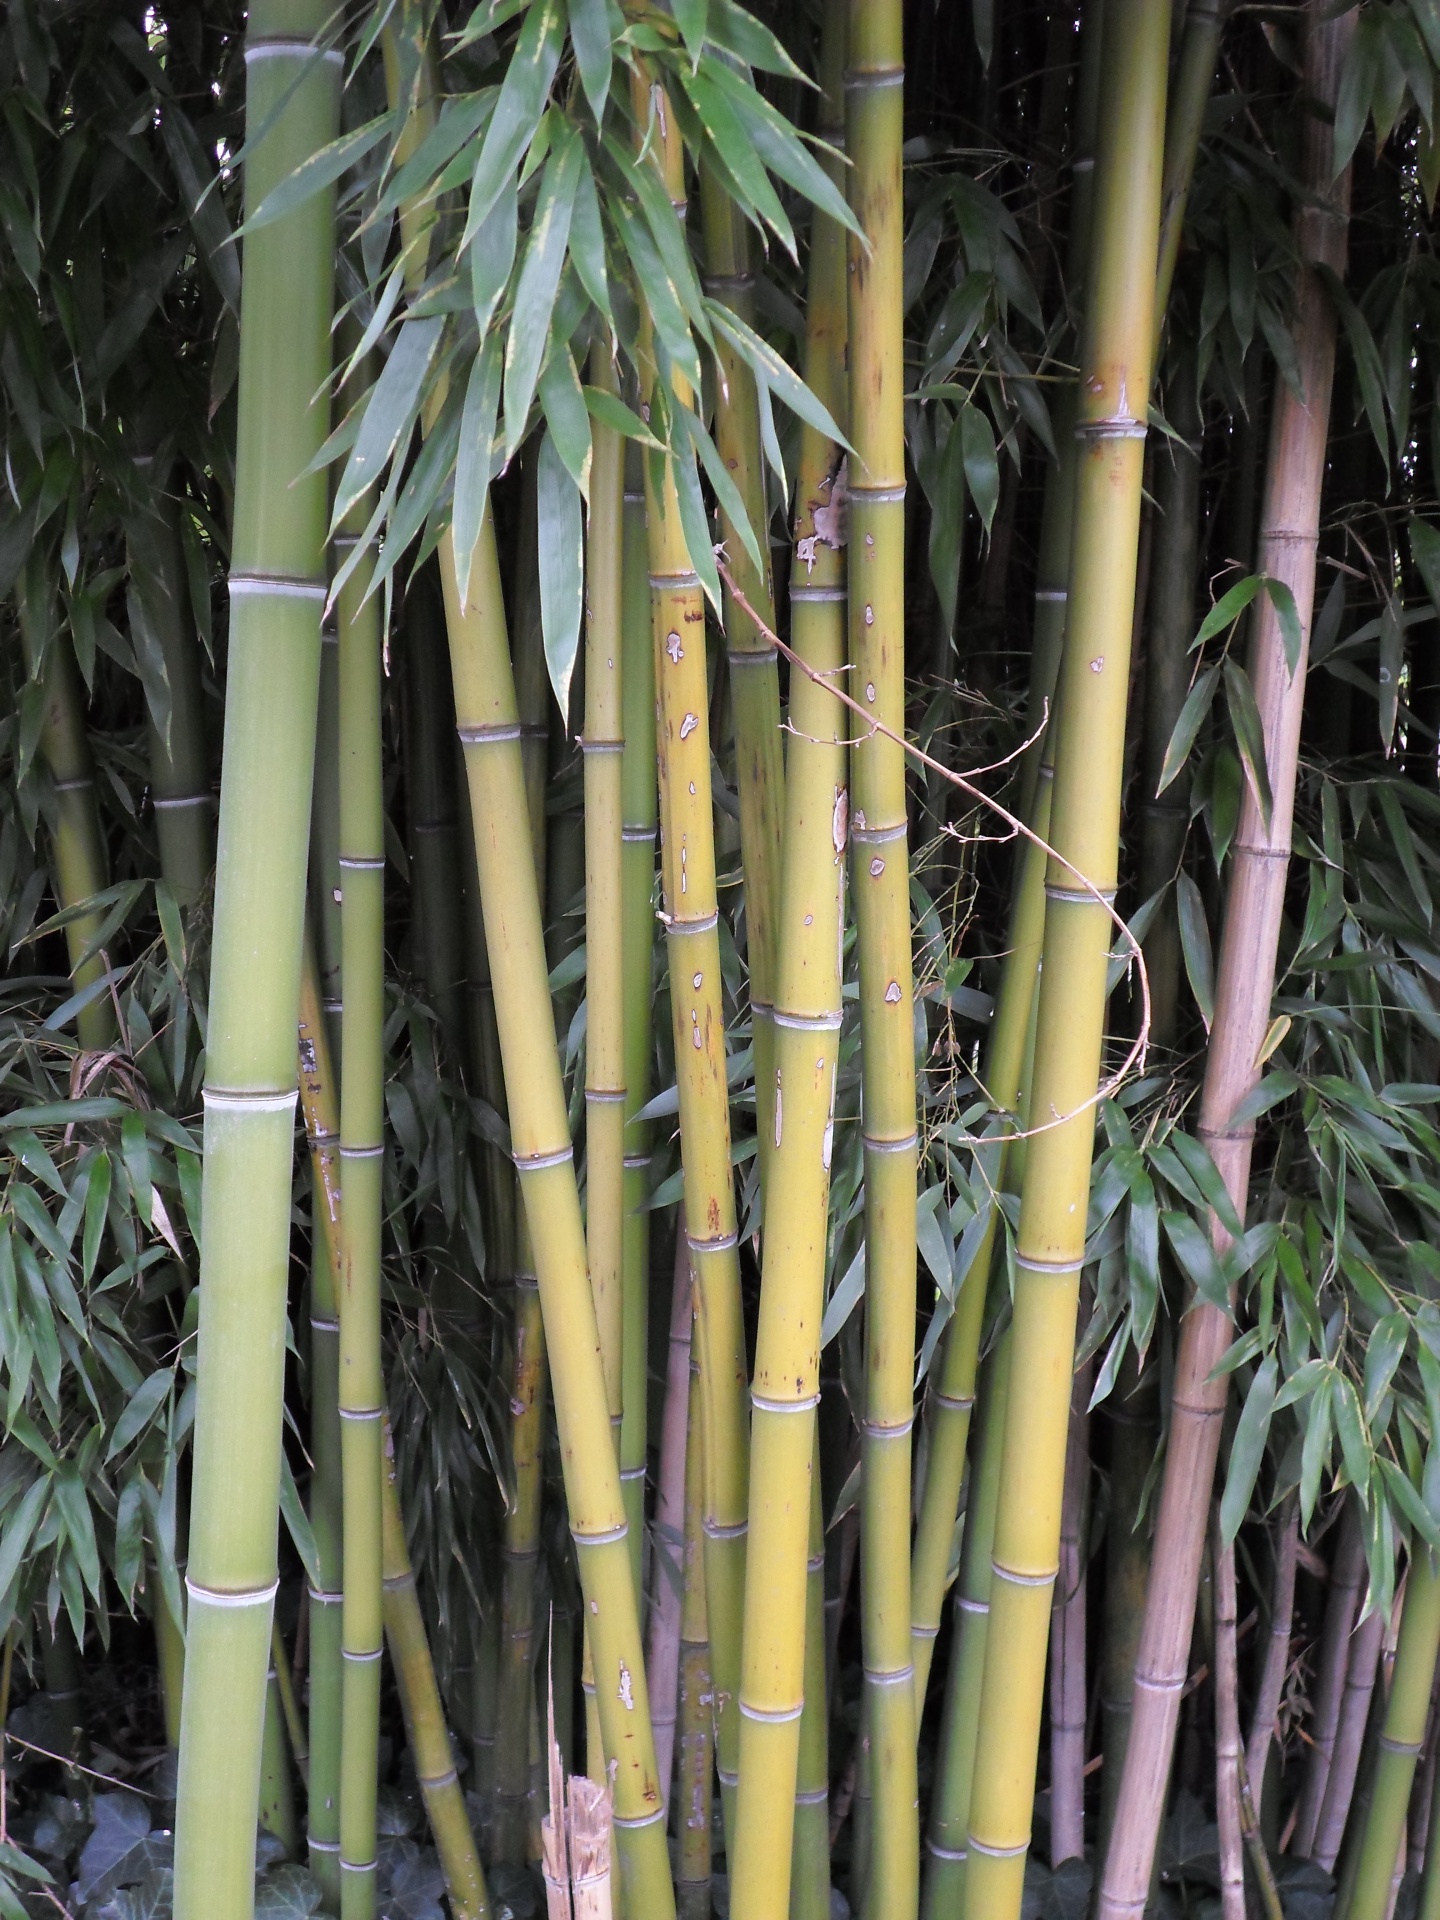 Bamboo (stubble, leaves, stalk and rhizome) may set much more CO2 than deciduous trees, up to 12 tonnes of CO2 / ha / year (3 tons for a deciduous forest). So it also releases more oxygen than trees.